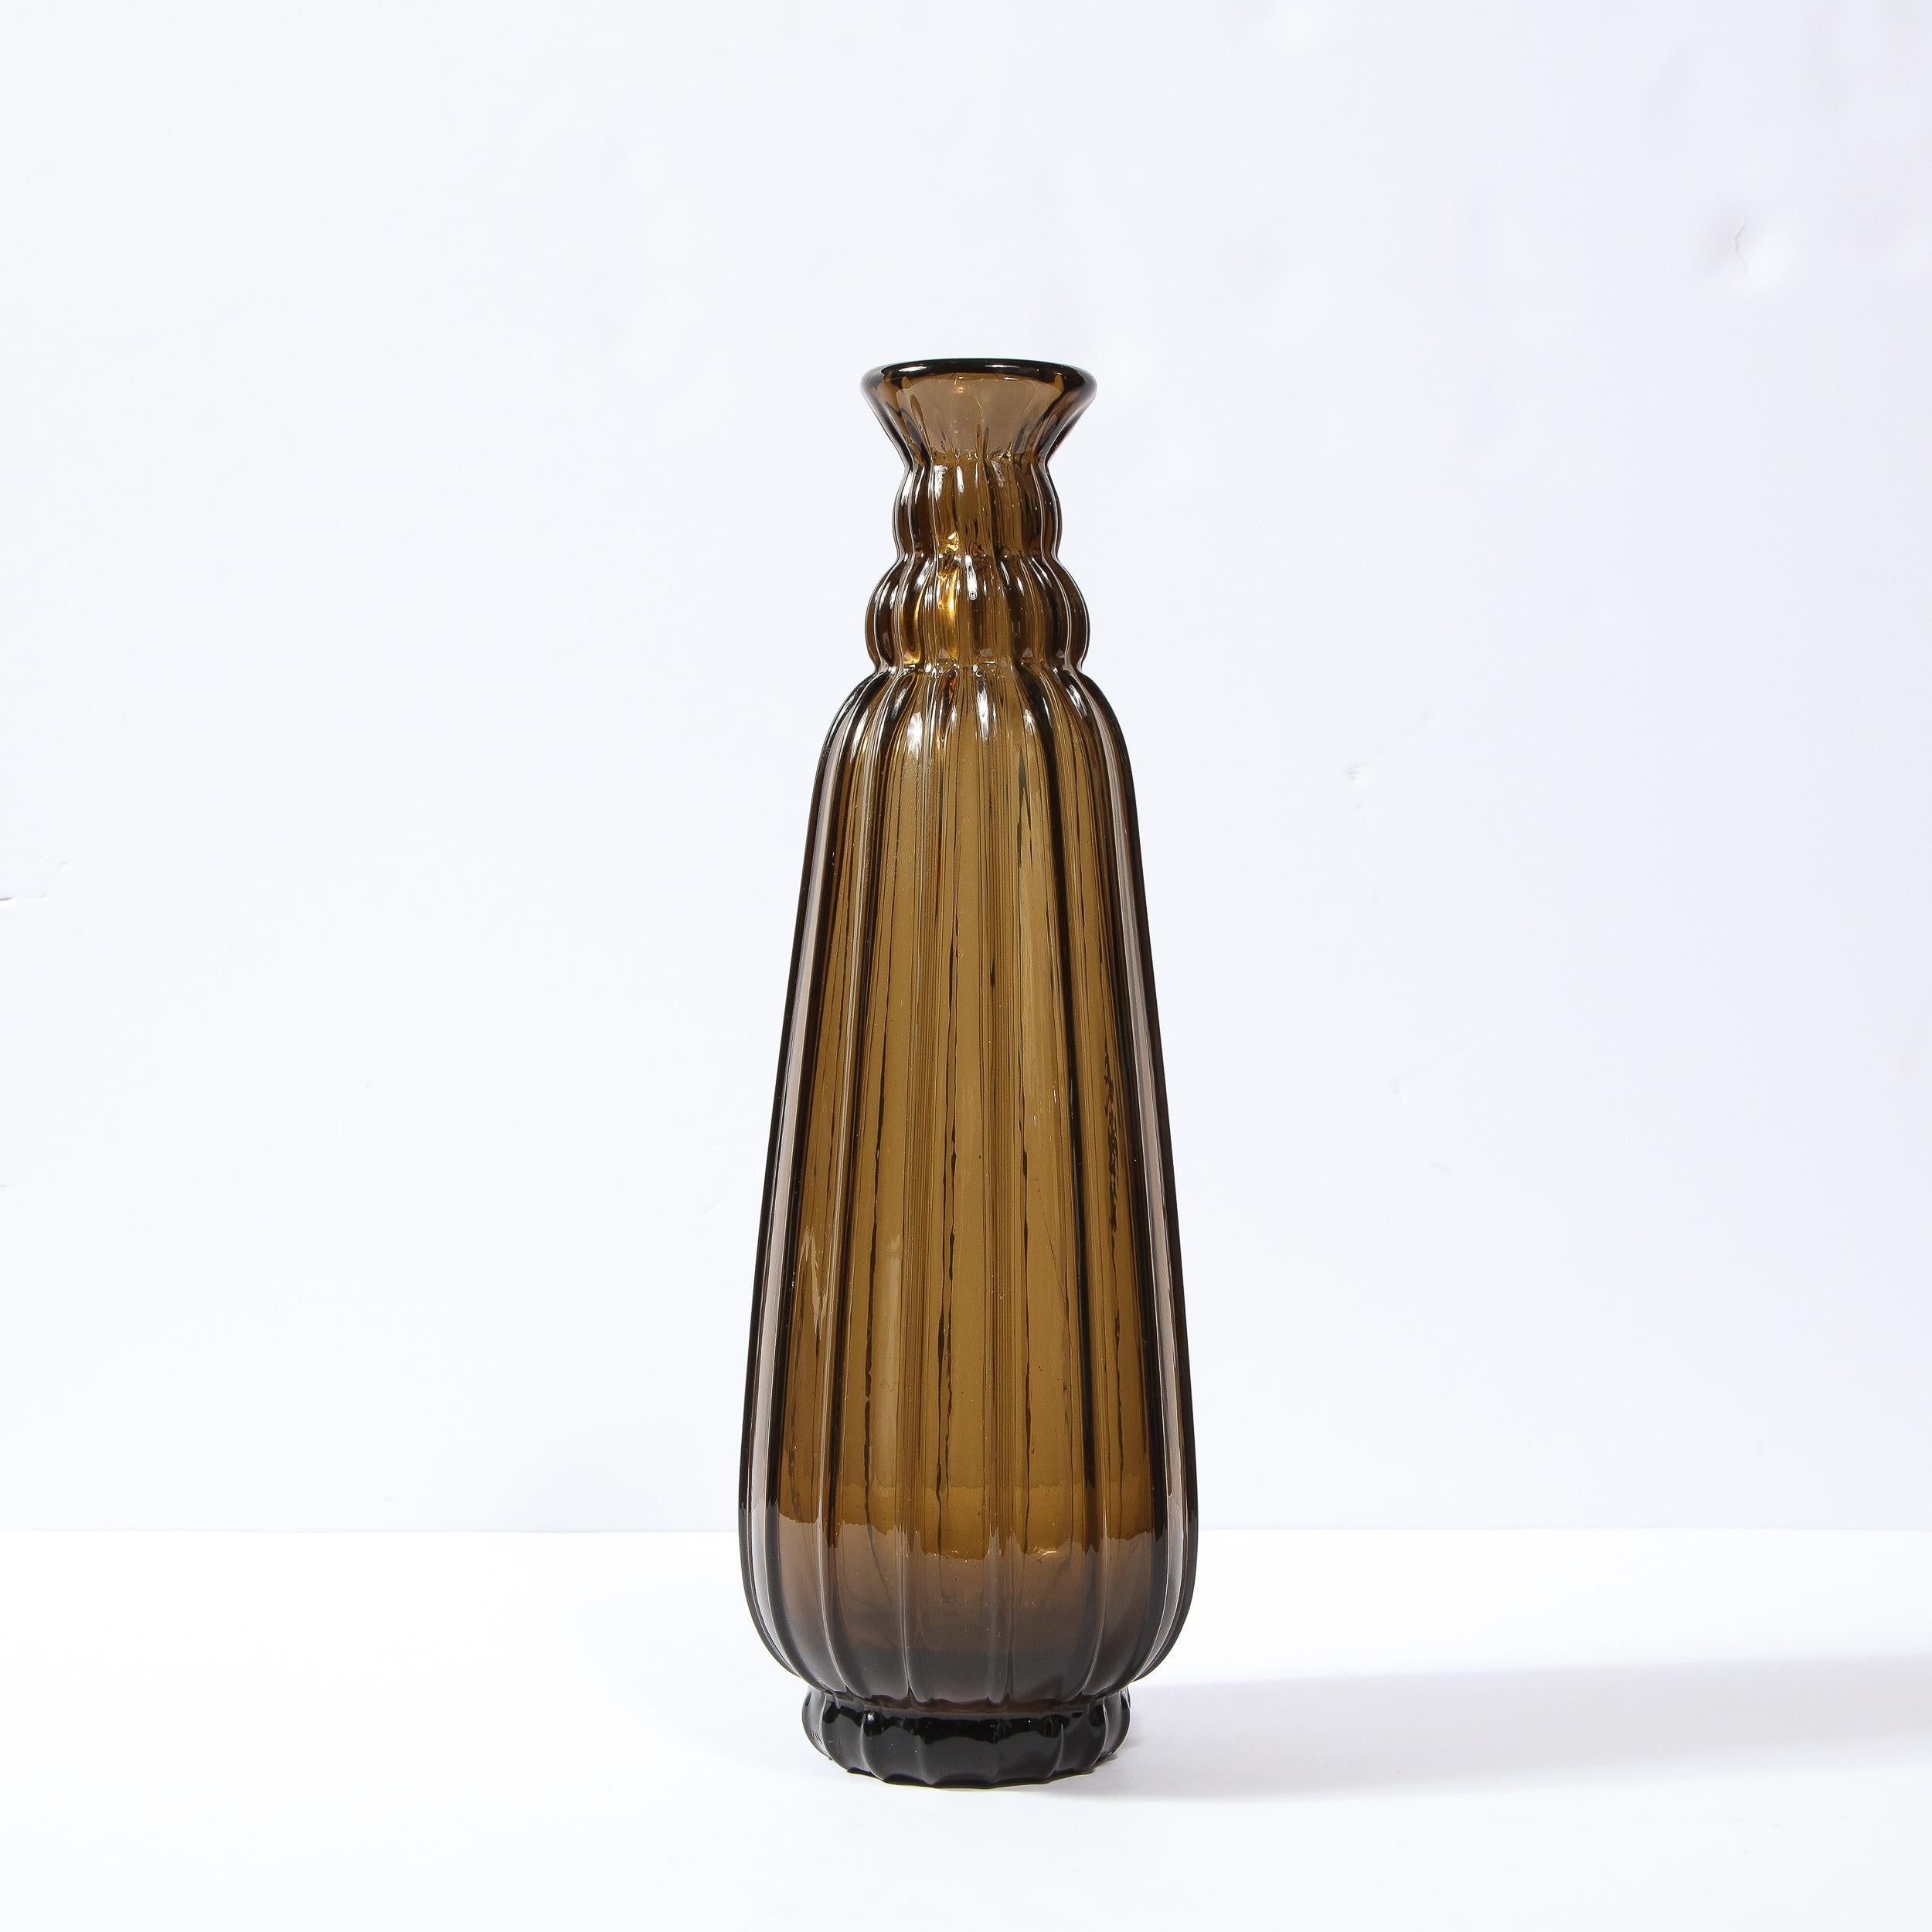 This outstanding topaz and museum quality French Art Deco hand blown glass vase by Daum studio is features vertically equidistant repeating striations tapering to a narrow neck. This elongated shaped vase was realized in Circa 1935. The vase or